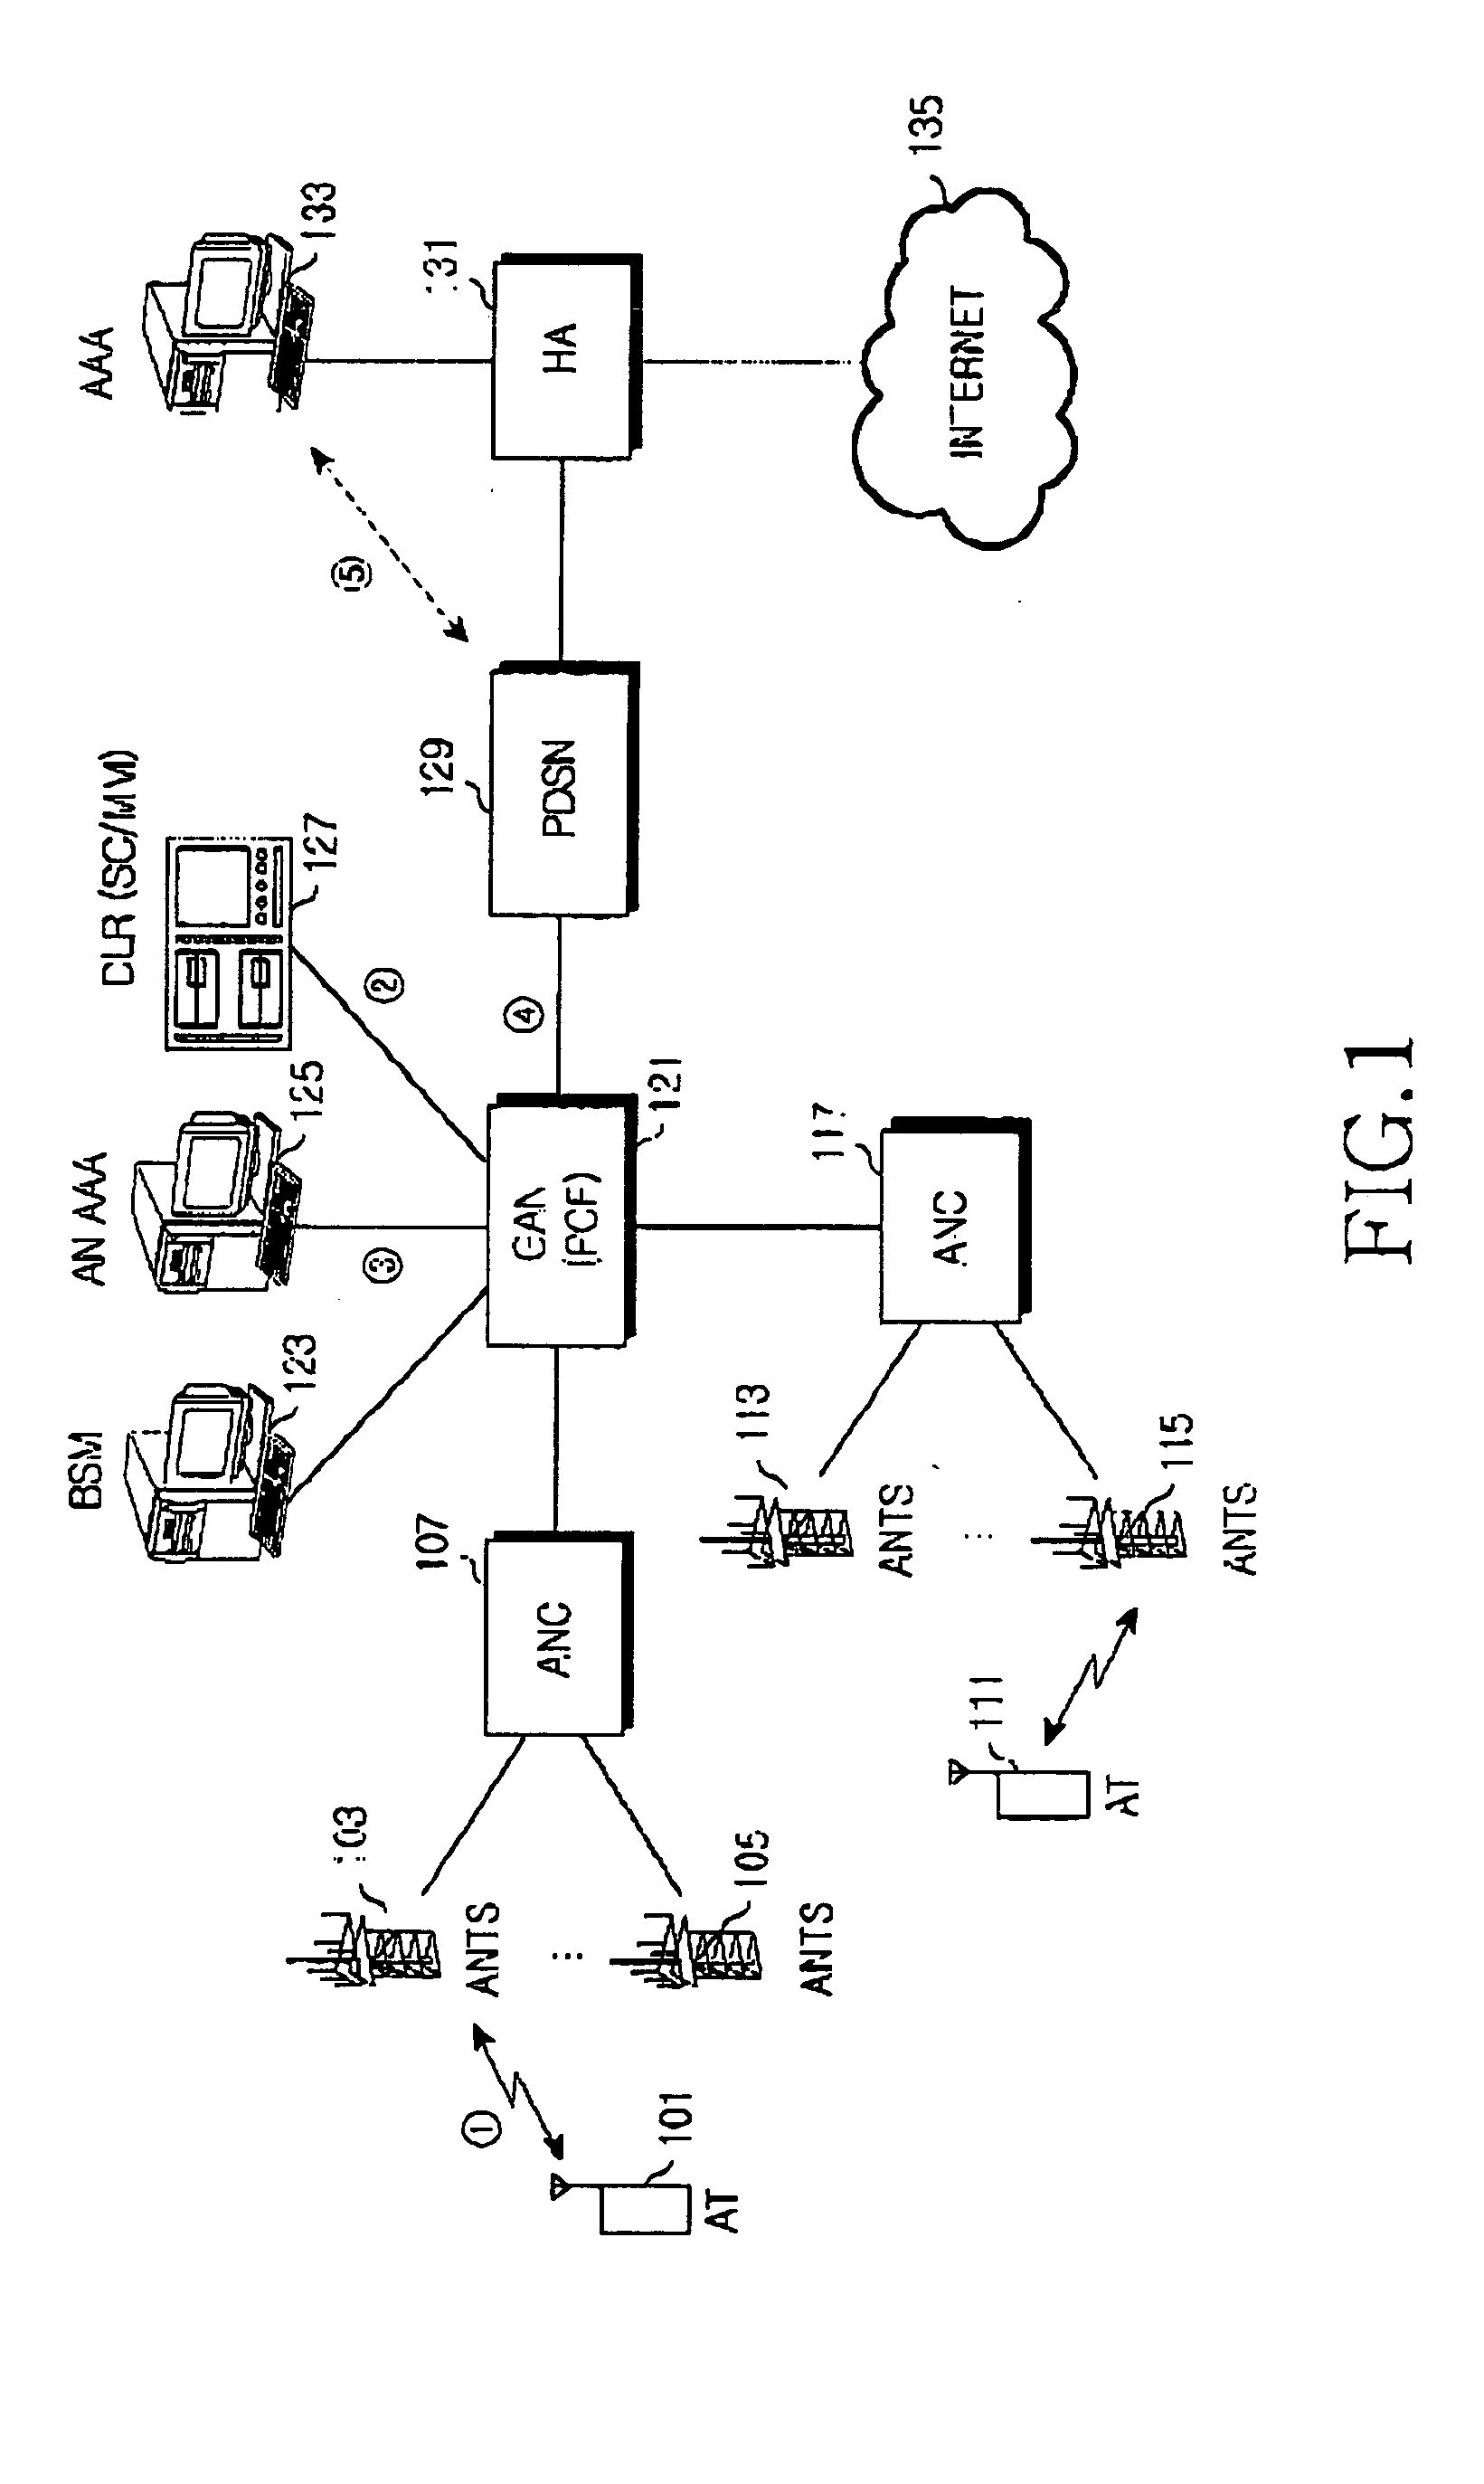 Method and apparatus for allocating an unicast access terminal identifier according to an access terminal's movement to subnet in a high-speed data dedicated system